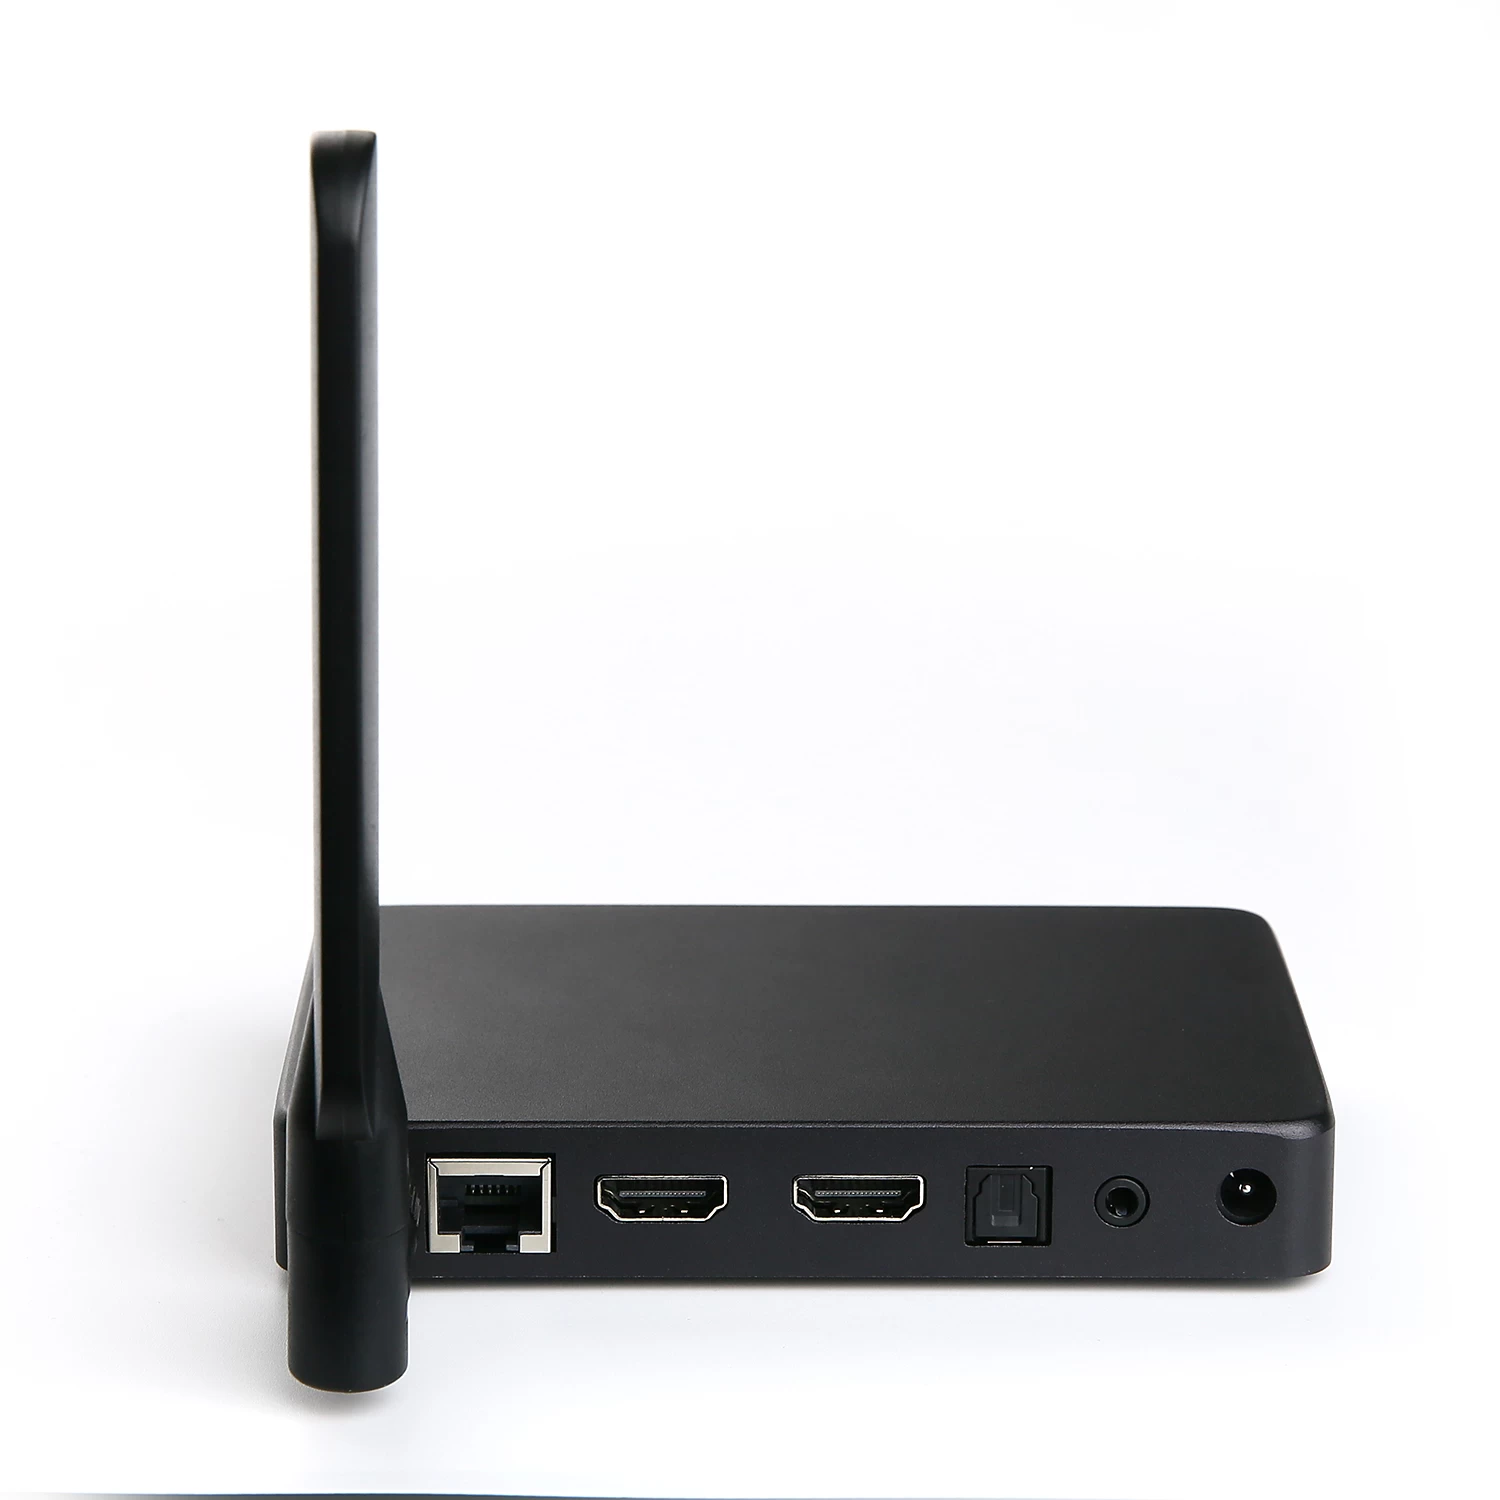 OEM TV Box Android manufacturer, OEM Android TV box suppliers